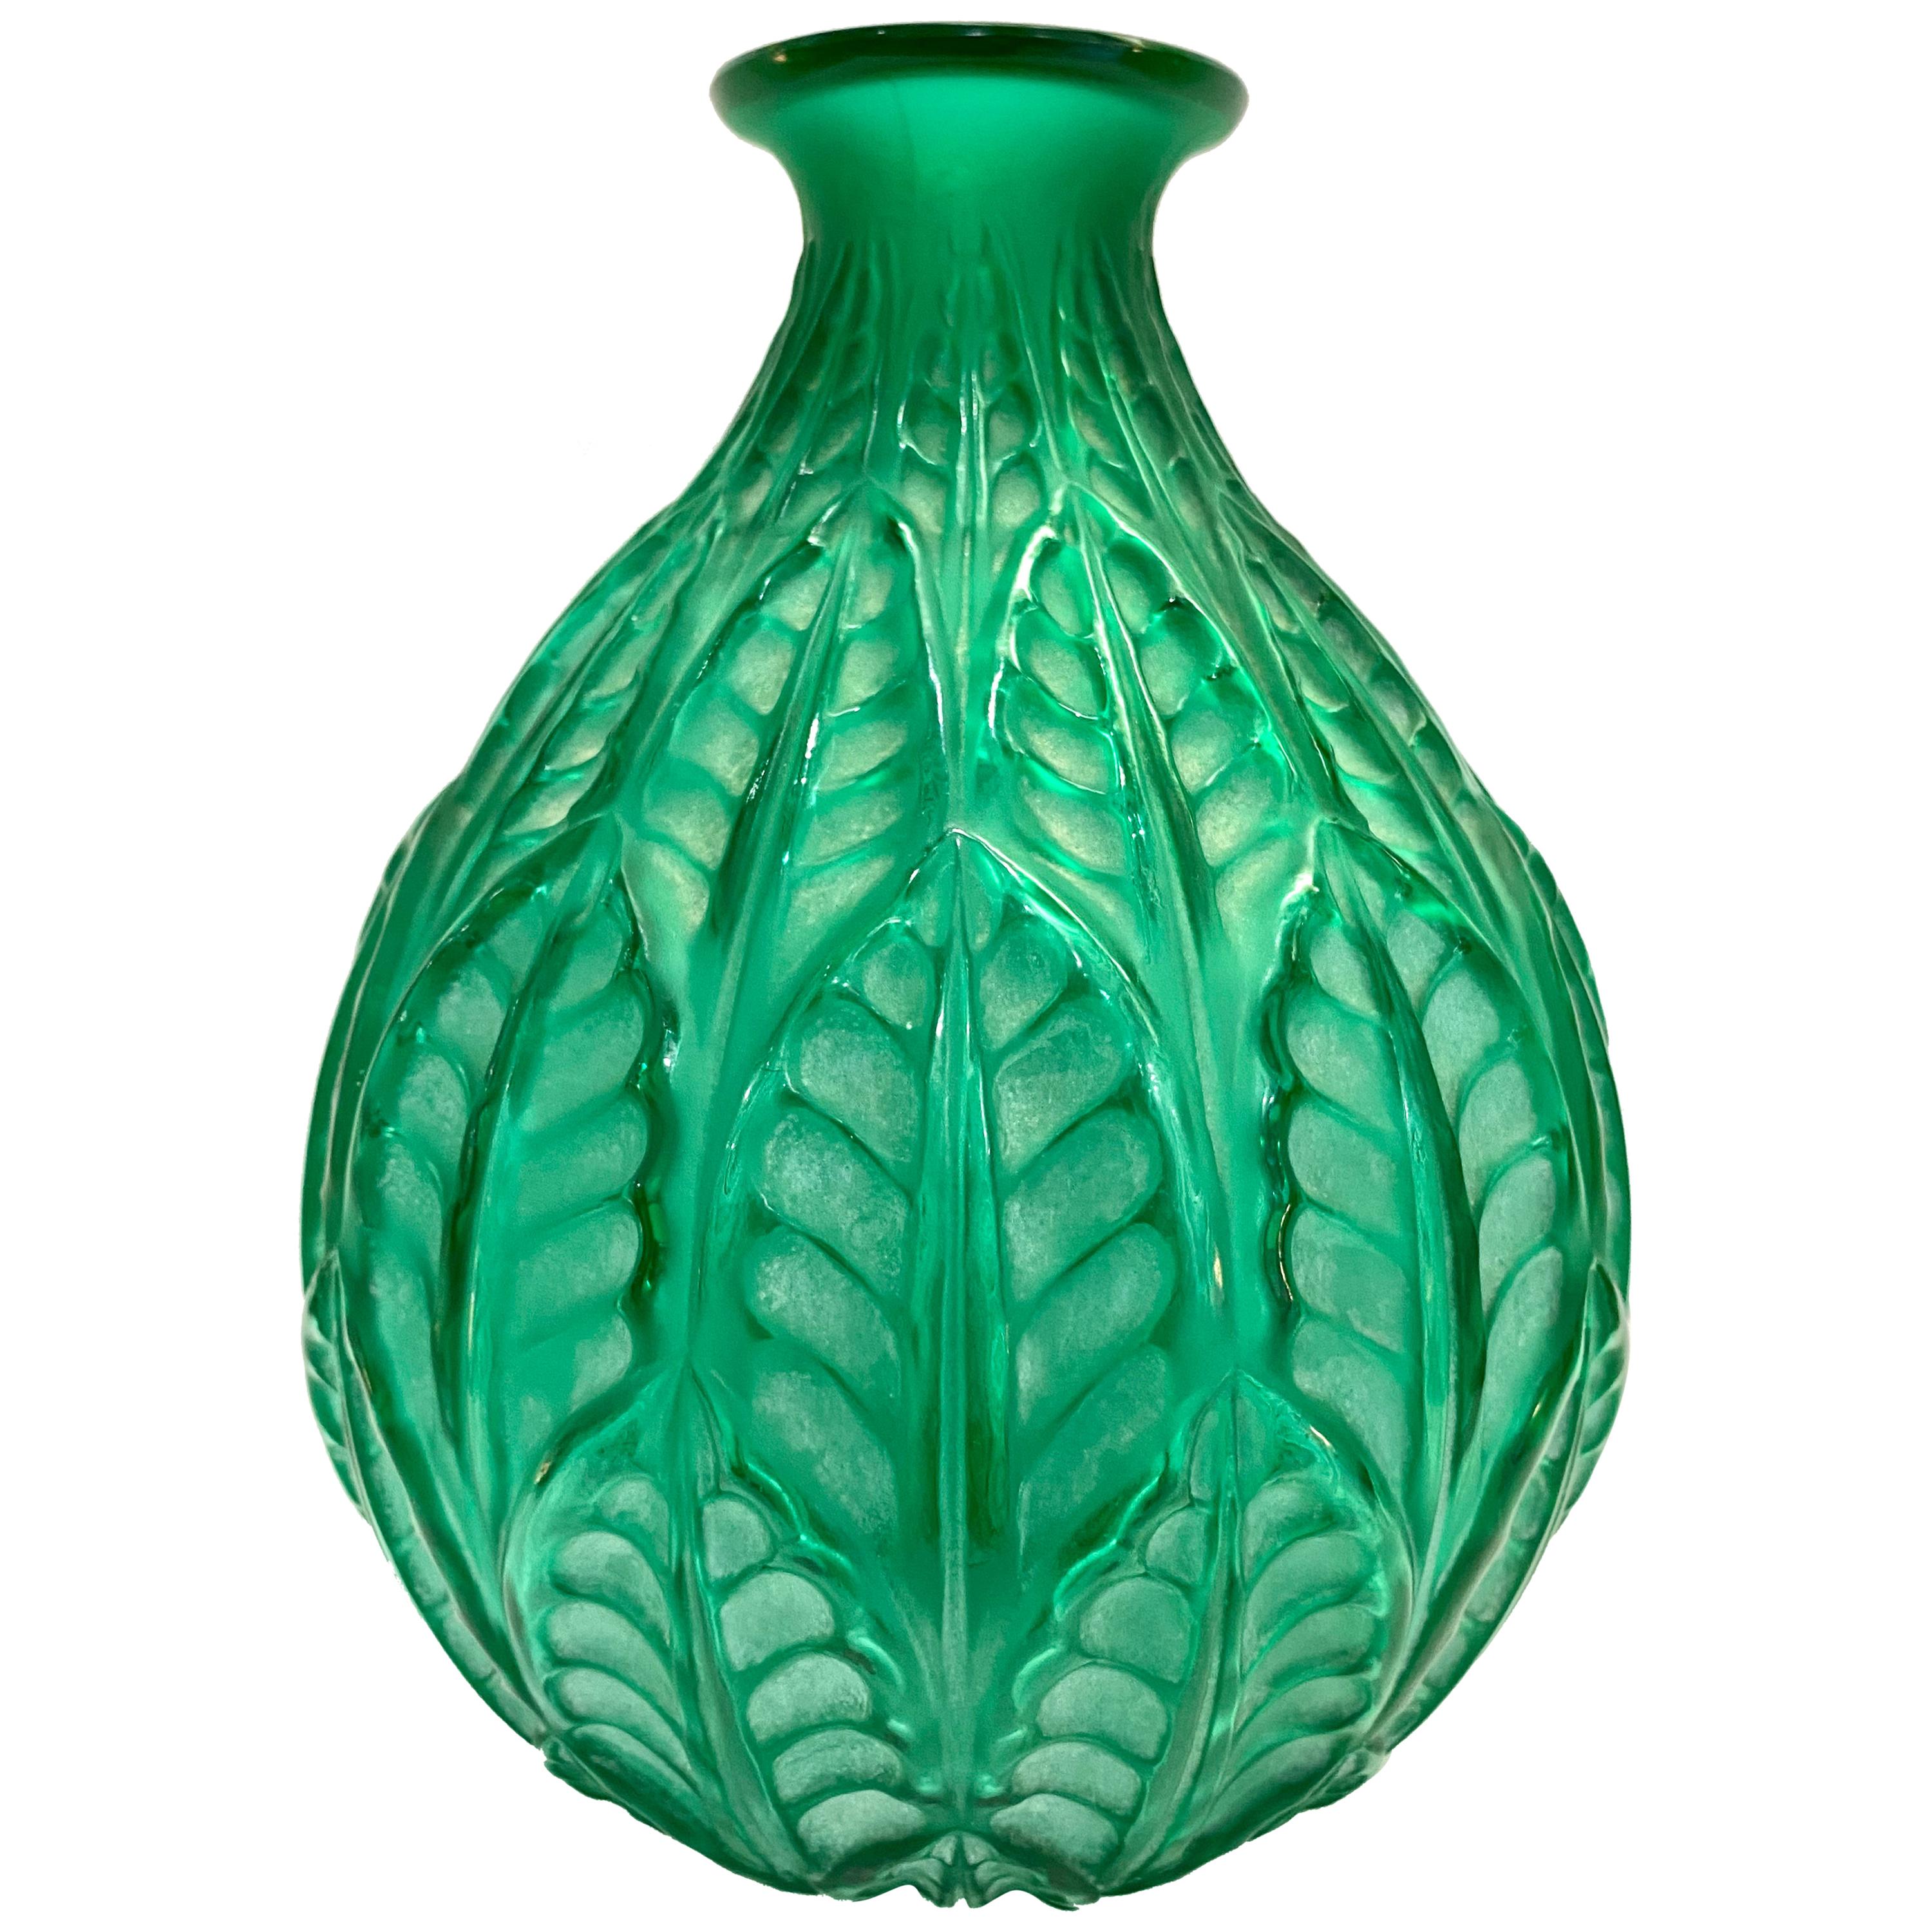 1927 René Lalique Malesherbes Vase in Emerald Green Glass Leaves